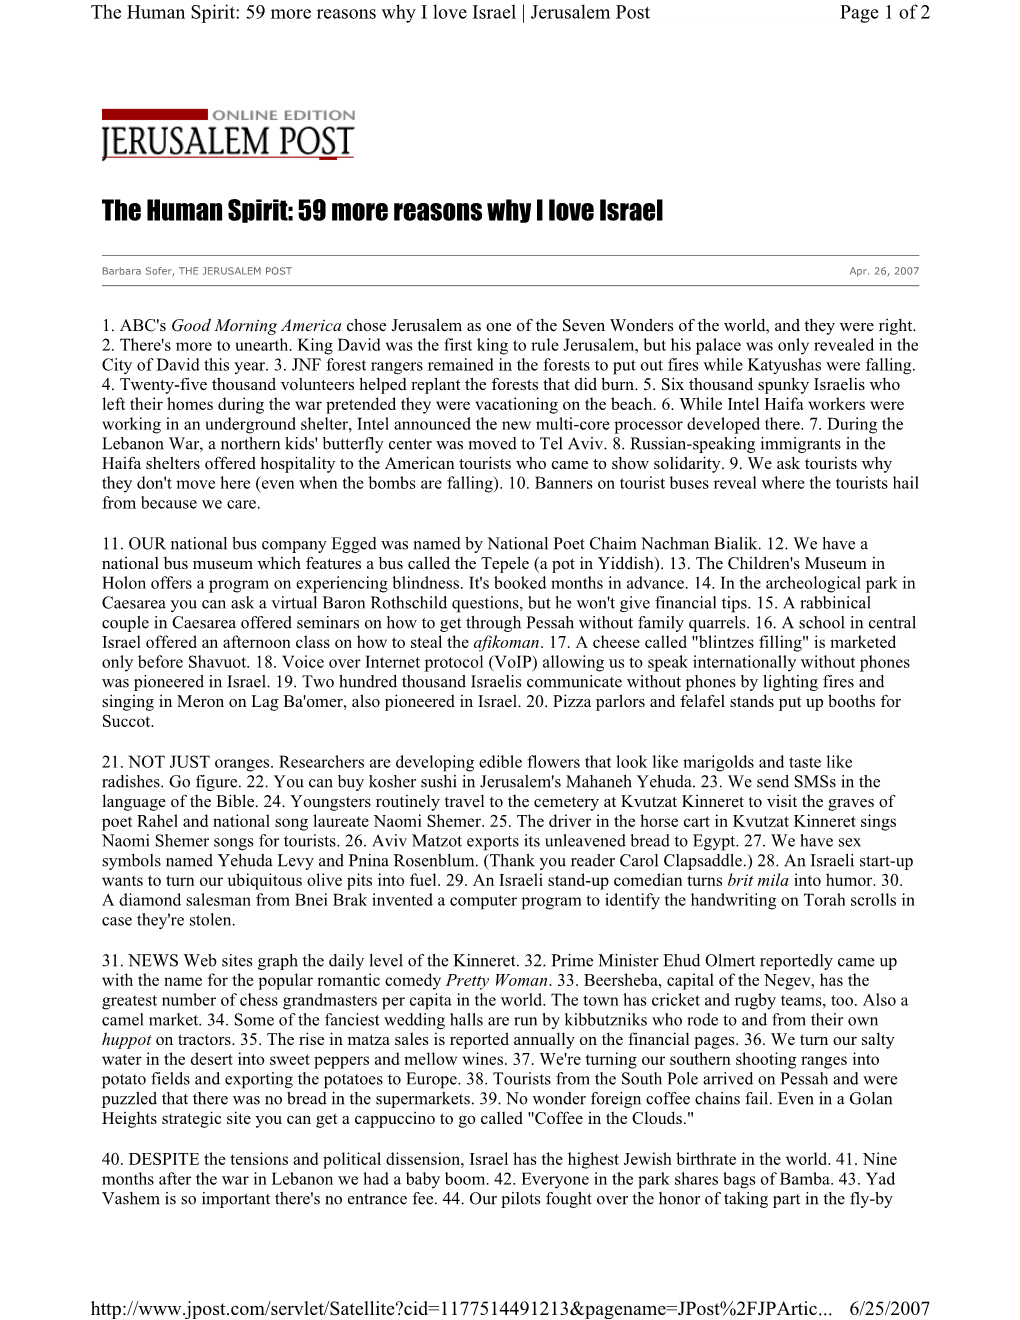 The Human Spirit: 59 More Reasons Why I Love Israel | Jerusalem Post Page 1 of 2